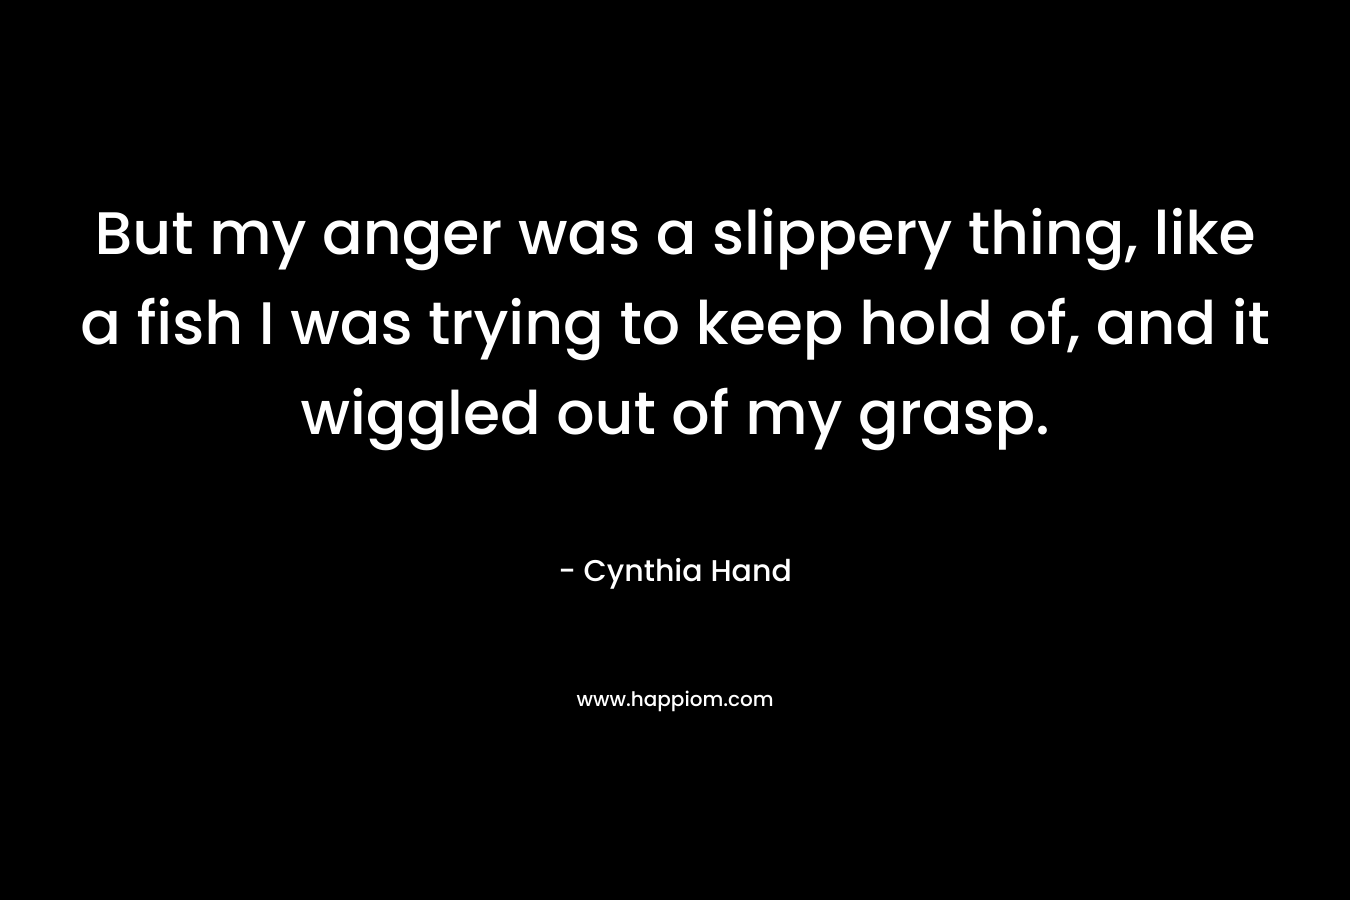 But my anger was a slippery thing, like a fish I was trying to keep hold of, and it wiggled out of my grasp. – Cynthia Hand